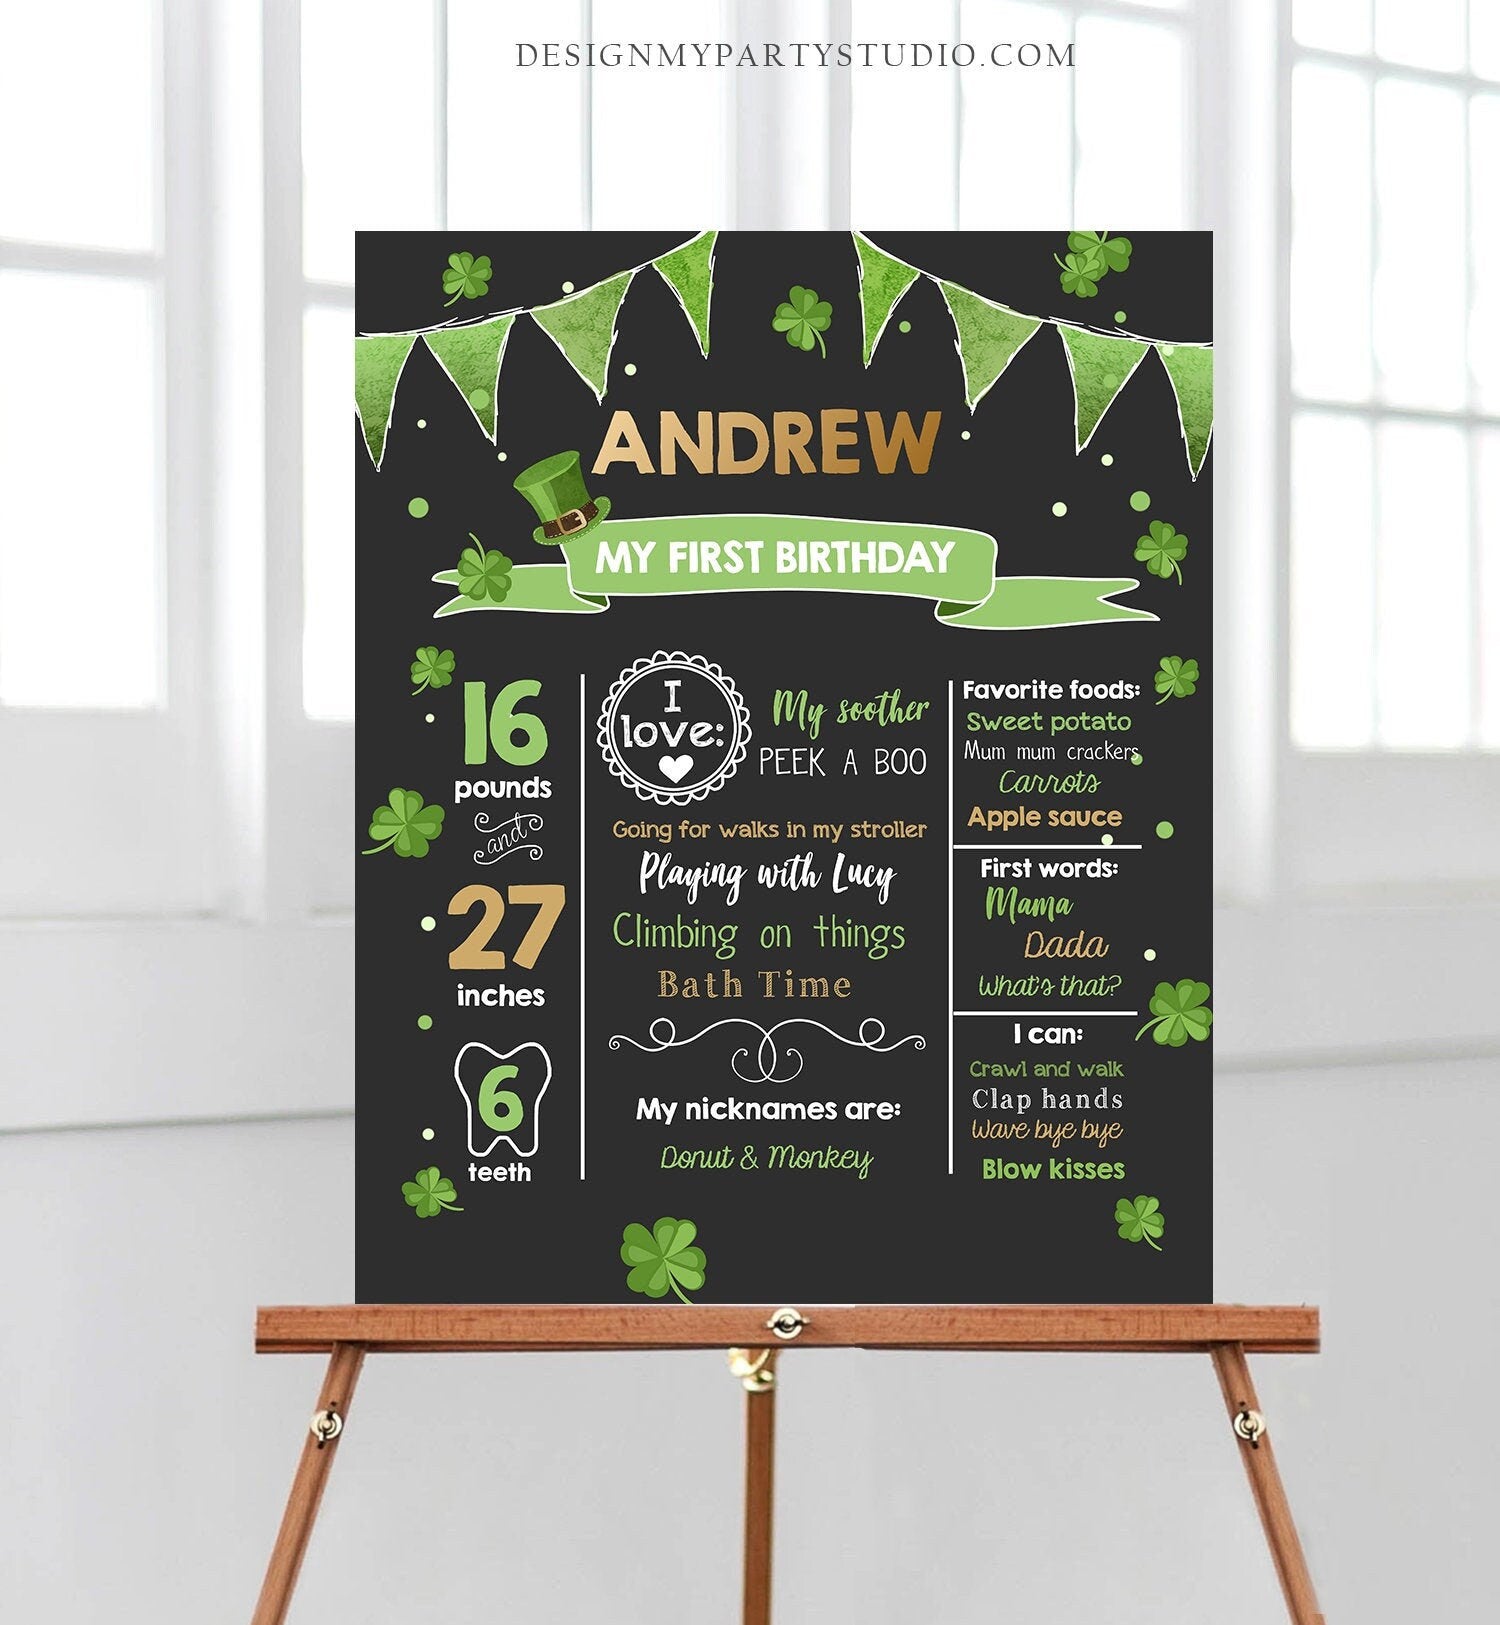 St Patrick's Day Poster Templates - Easil